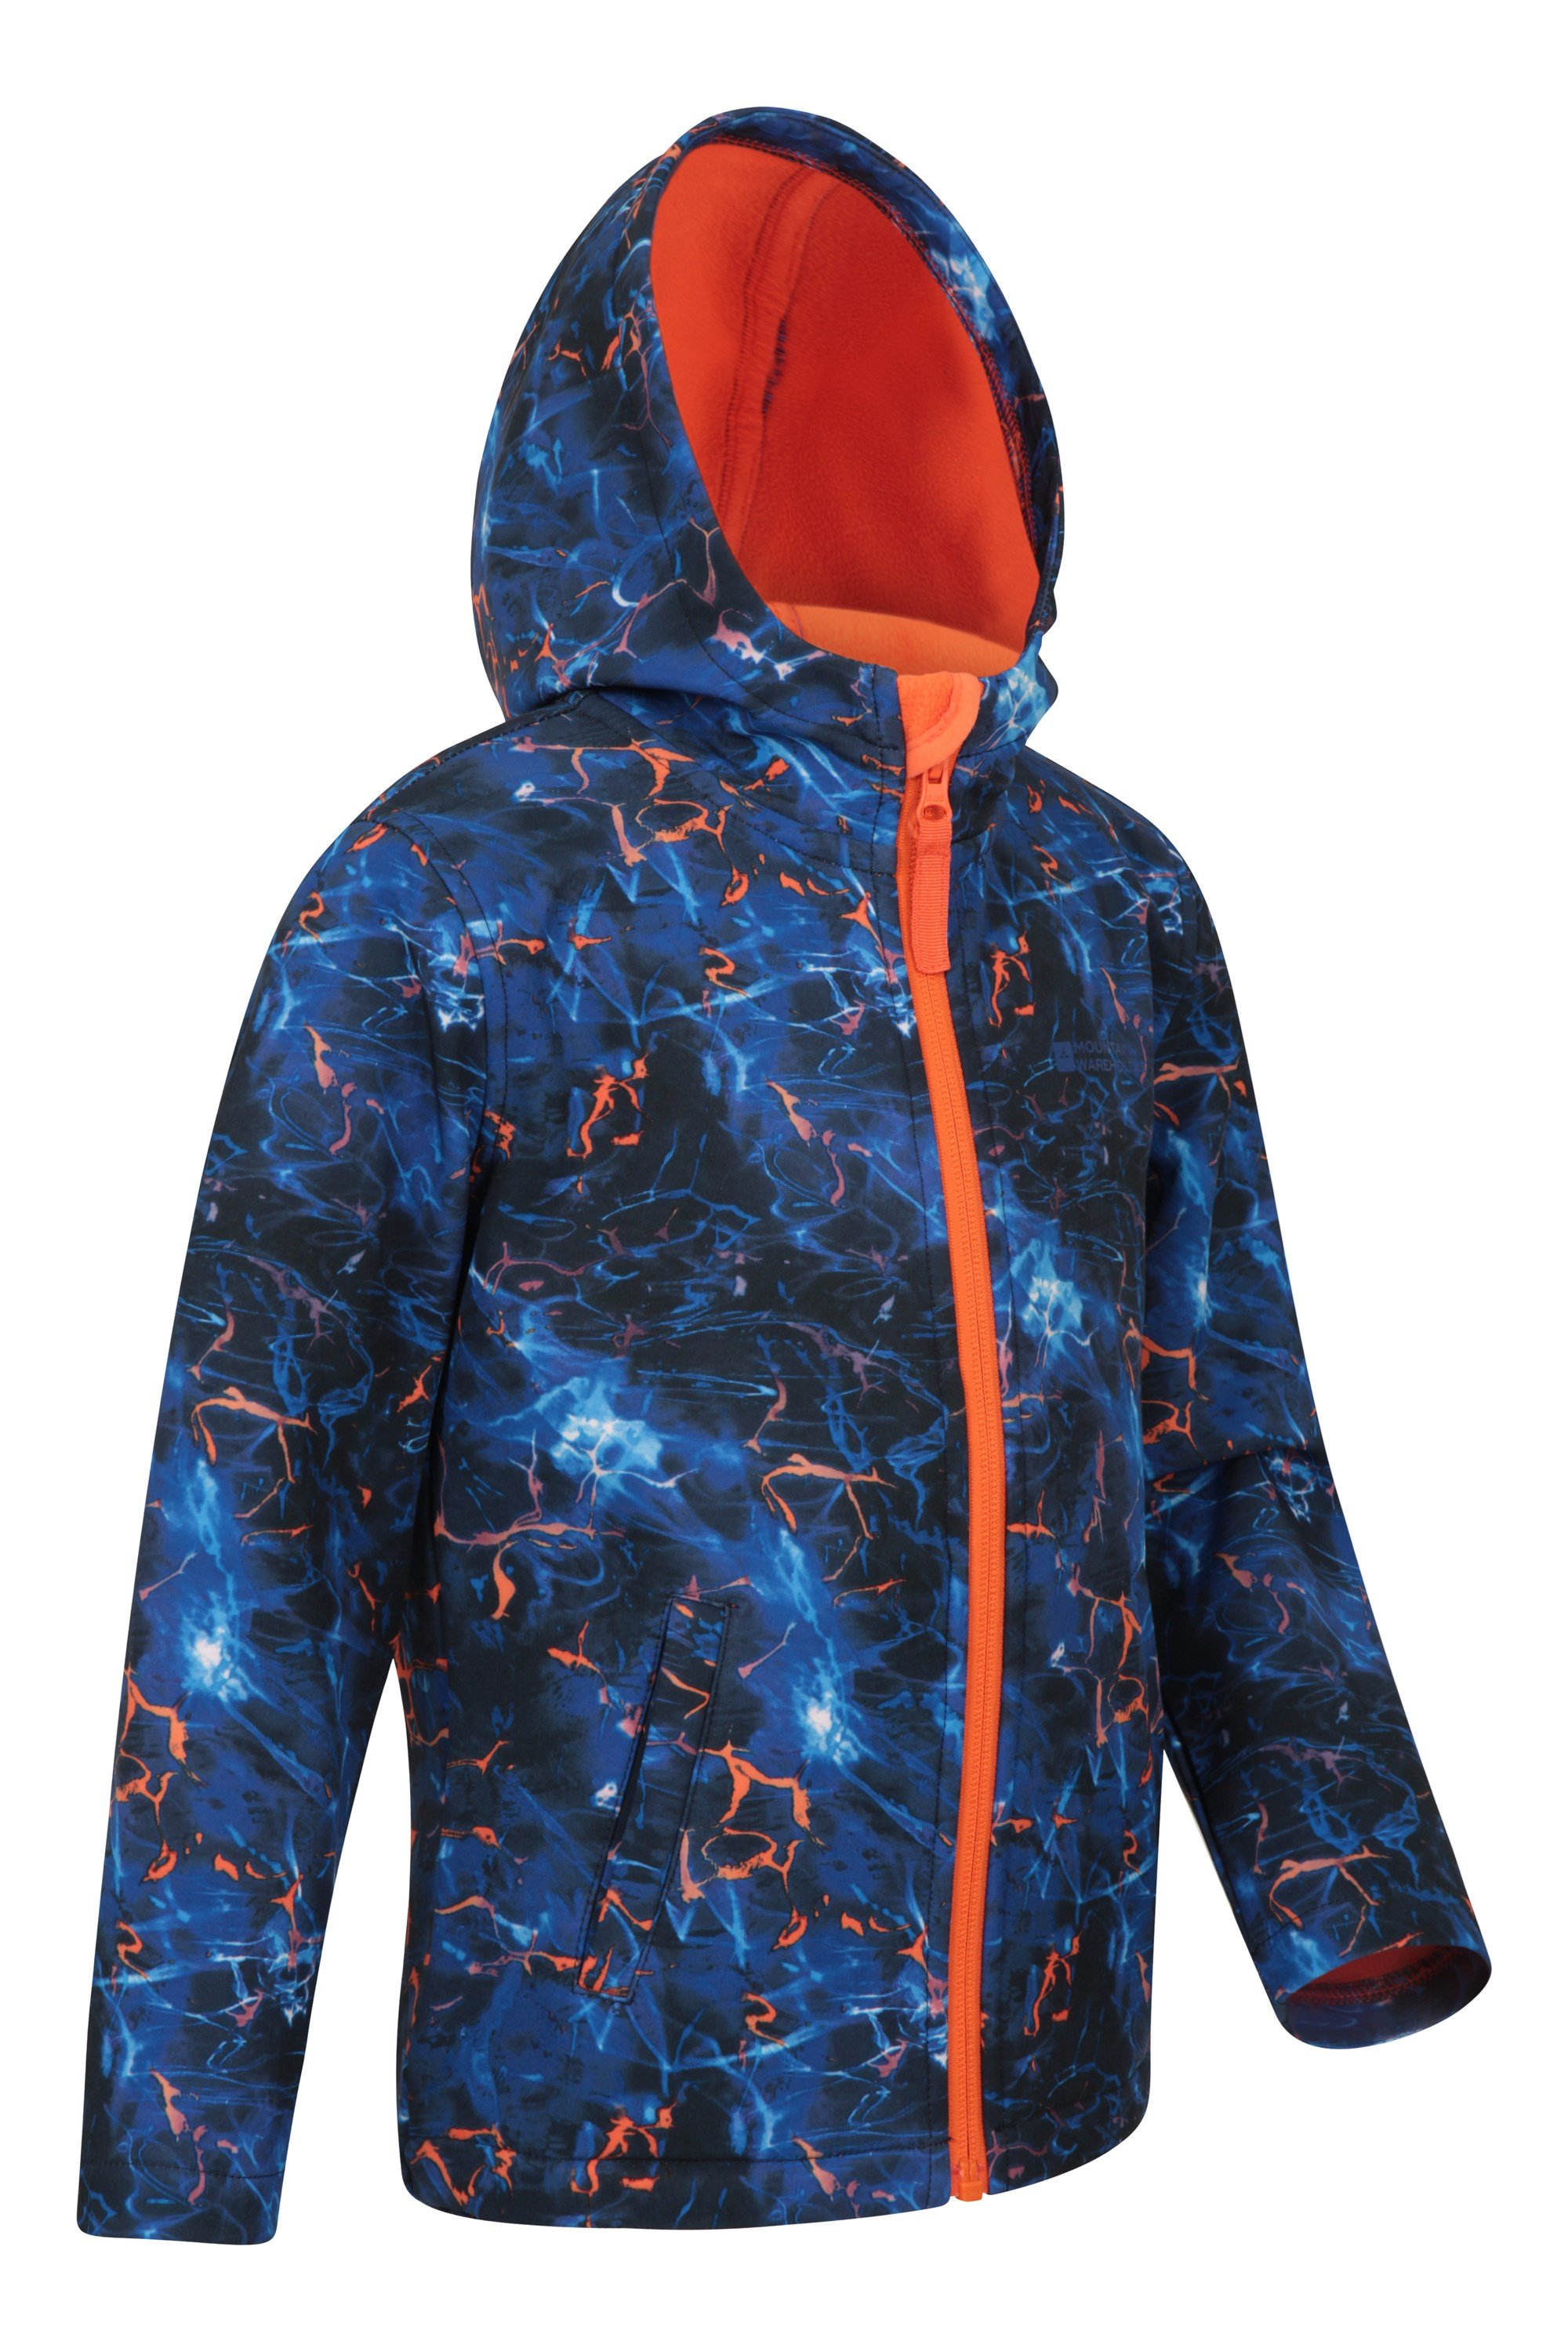 Outdoors Mountain Warehouse Kids Water-Resistant Softshell Jacket 